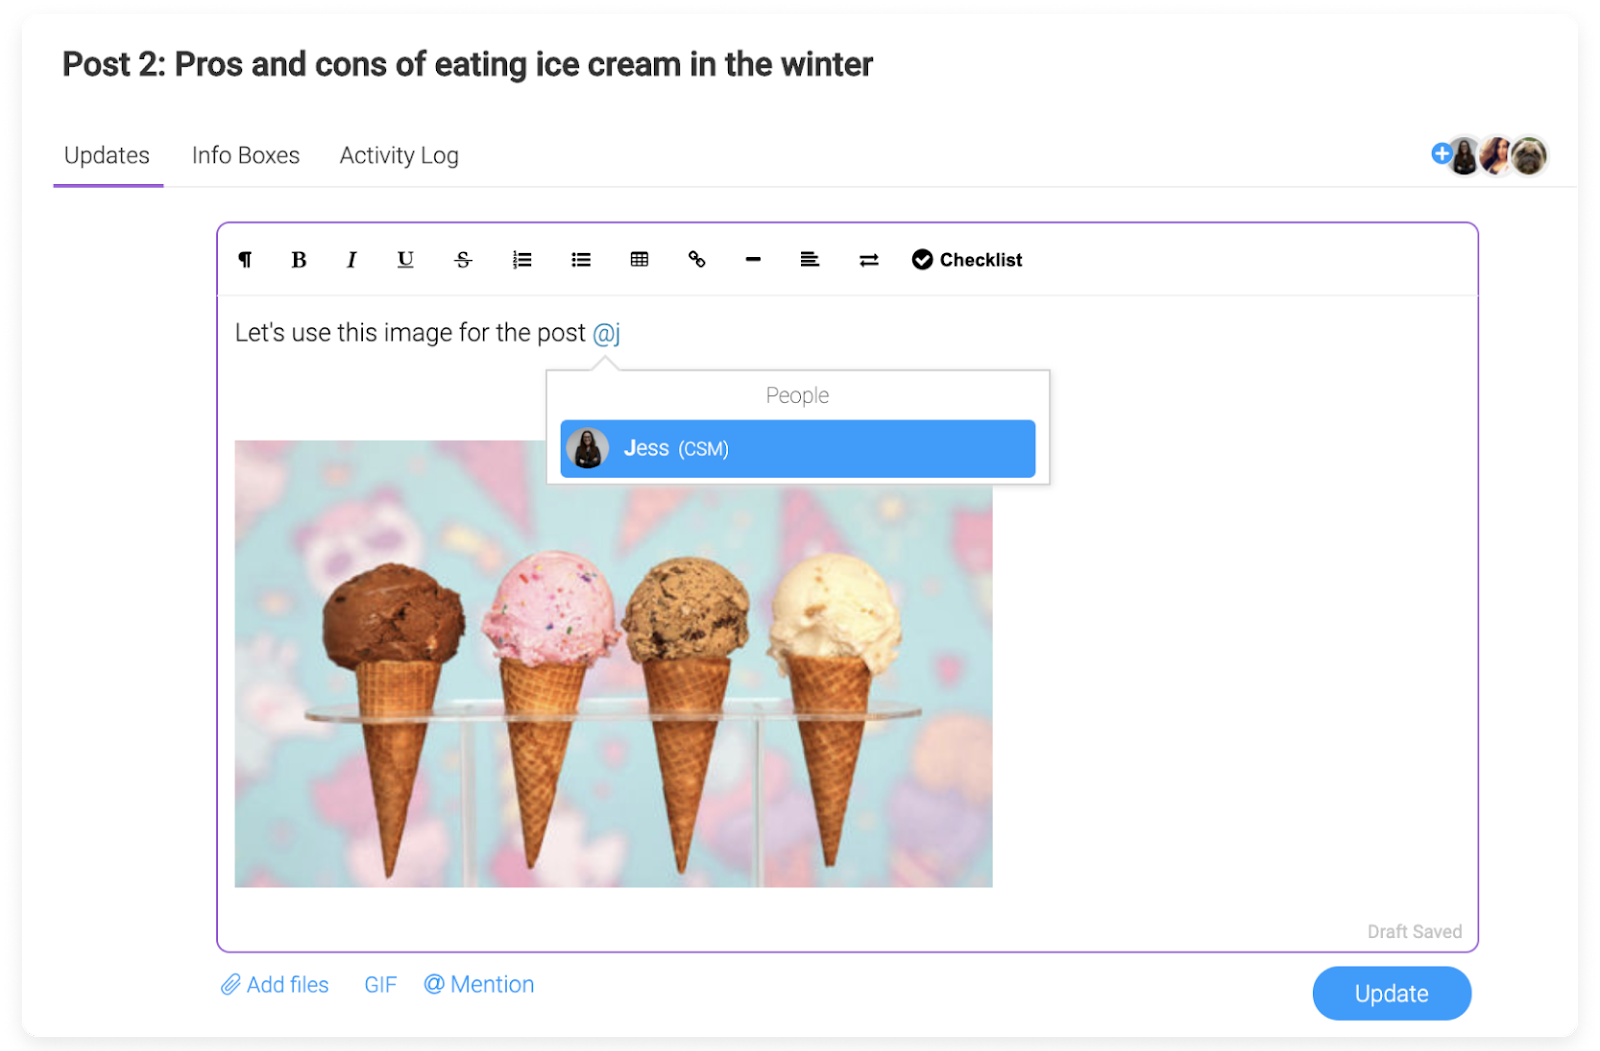 monday.com allows users to collaborate with comments, file sharing, and more.